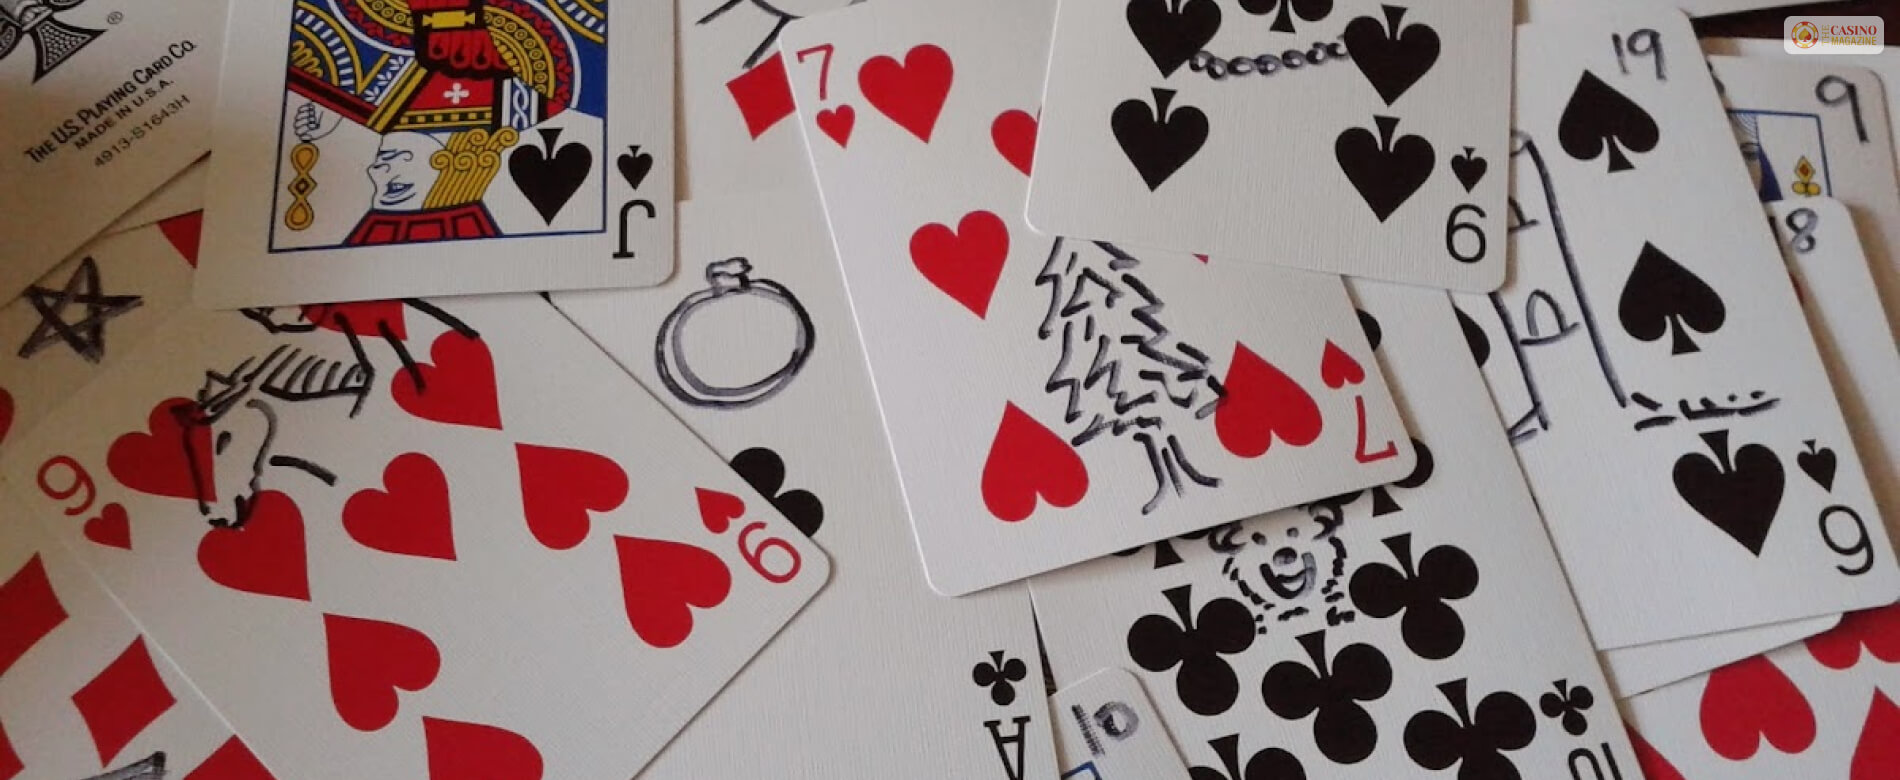 How Many Hearts Are In A Deck Of Cards Let’s Have A Look!